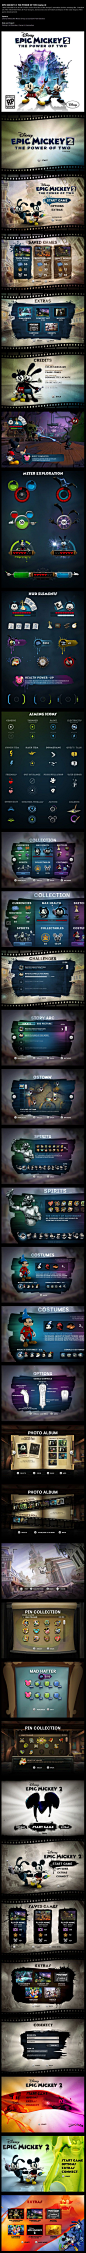 PROJECT BY Shane Mielke. Click here：http://www.behance.net/gallery/Epic-Mickey-2-The-Power-of-Two-Game-UI/8416329